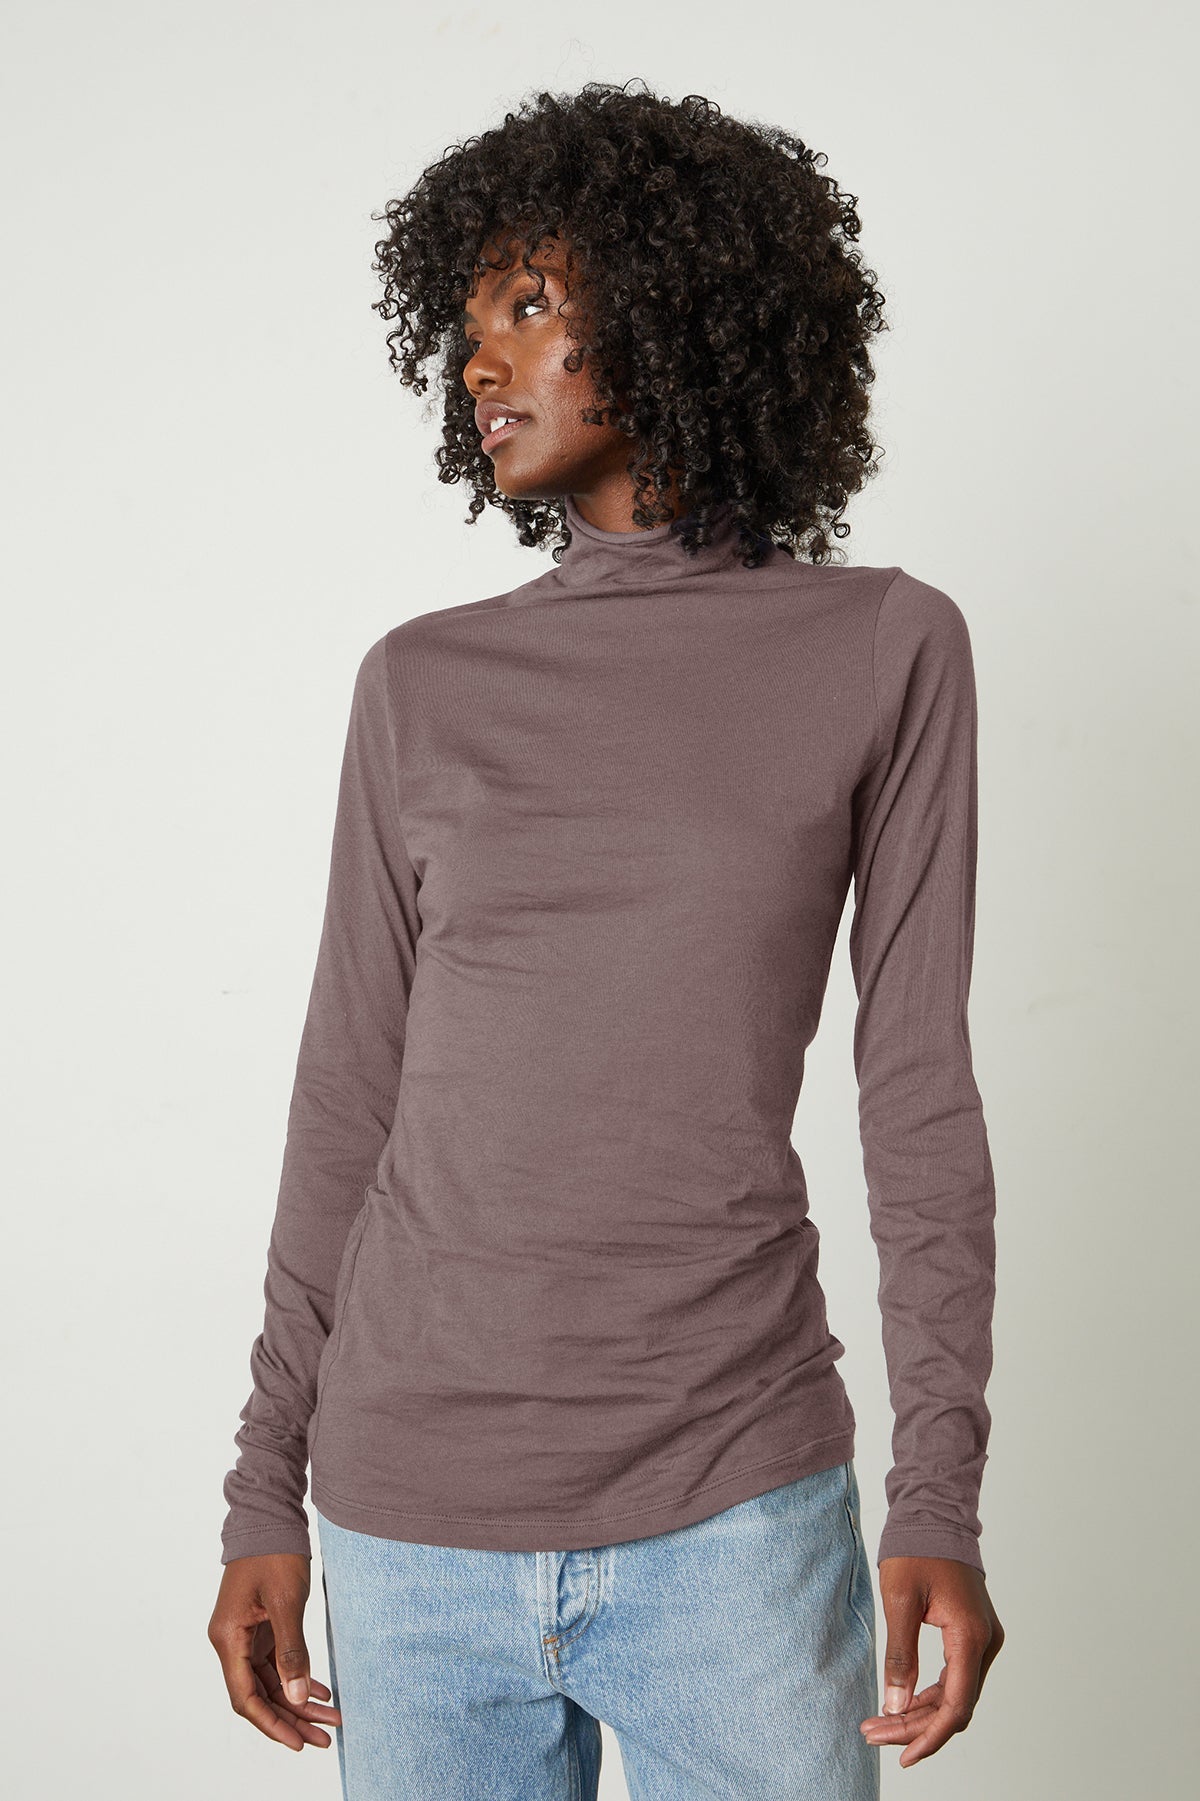 Talisia Gauzy Whisper Fitted Mock Neck Tee in Fawn with light blue denim front-26011186069697